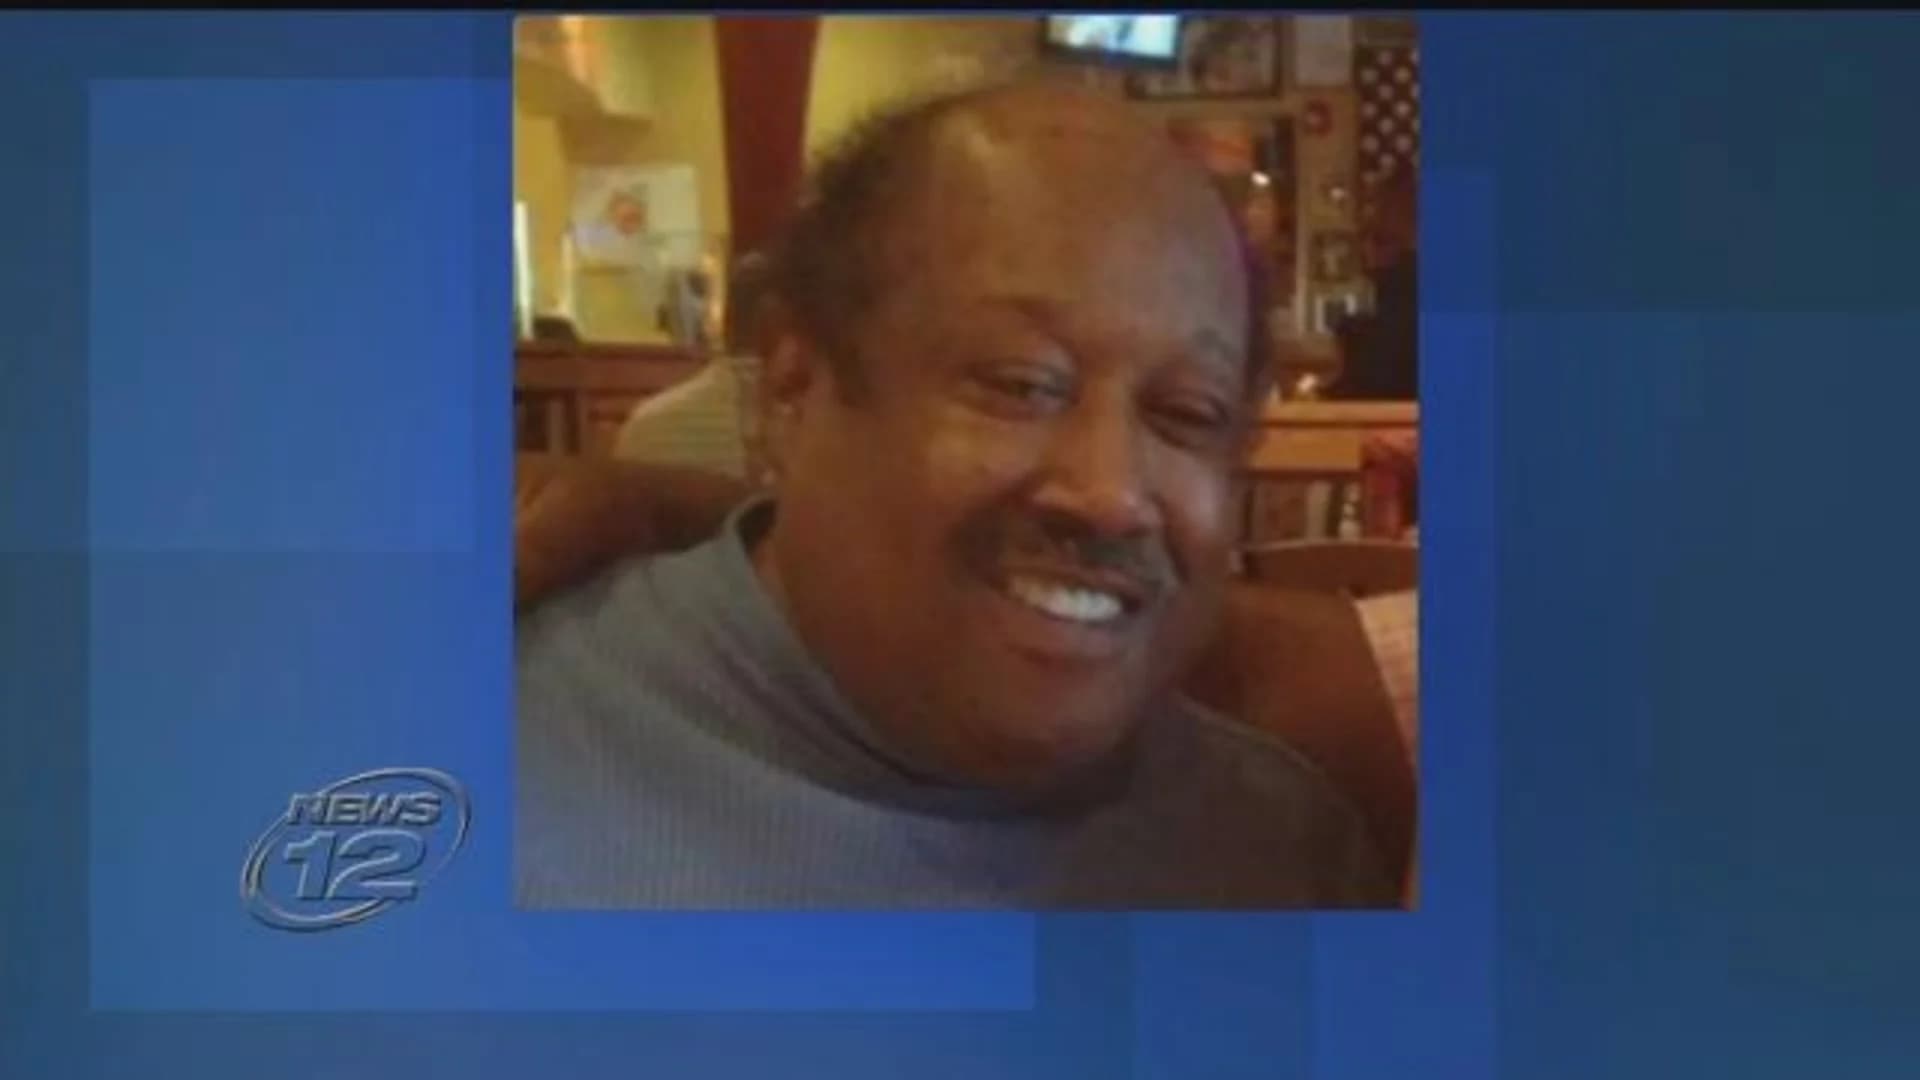 Police: Missing man found dead inside vehicle